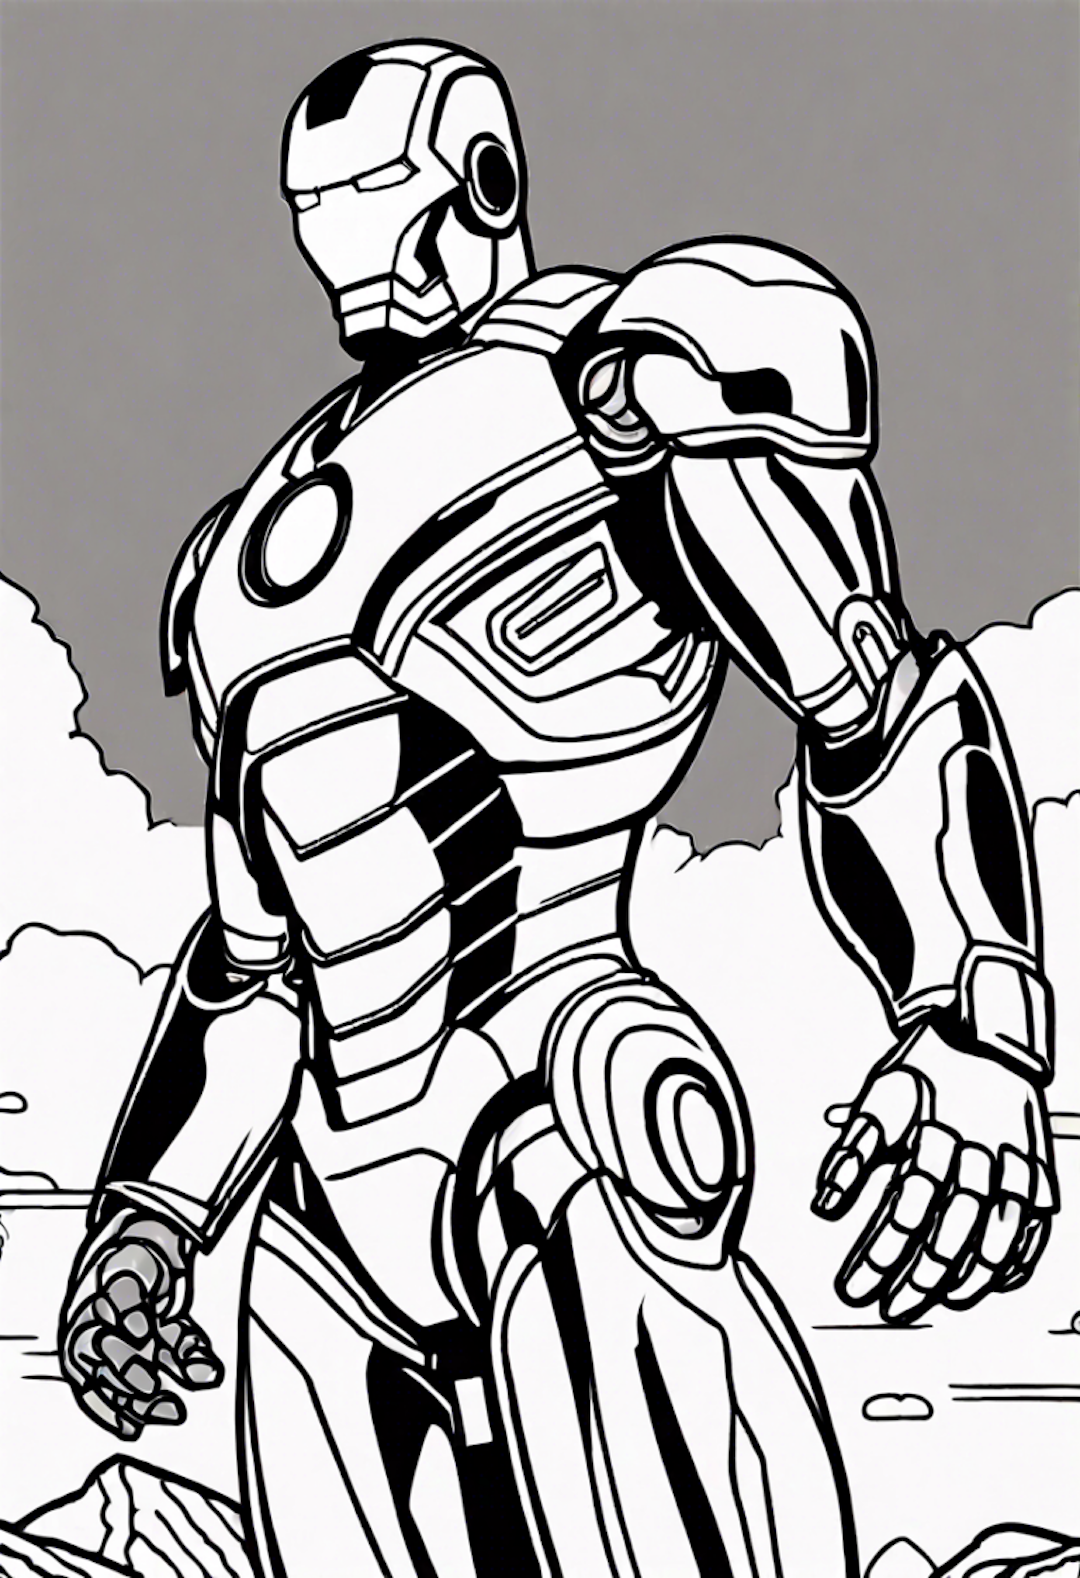 Epic Iron Man coloring pages